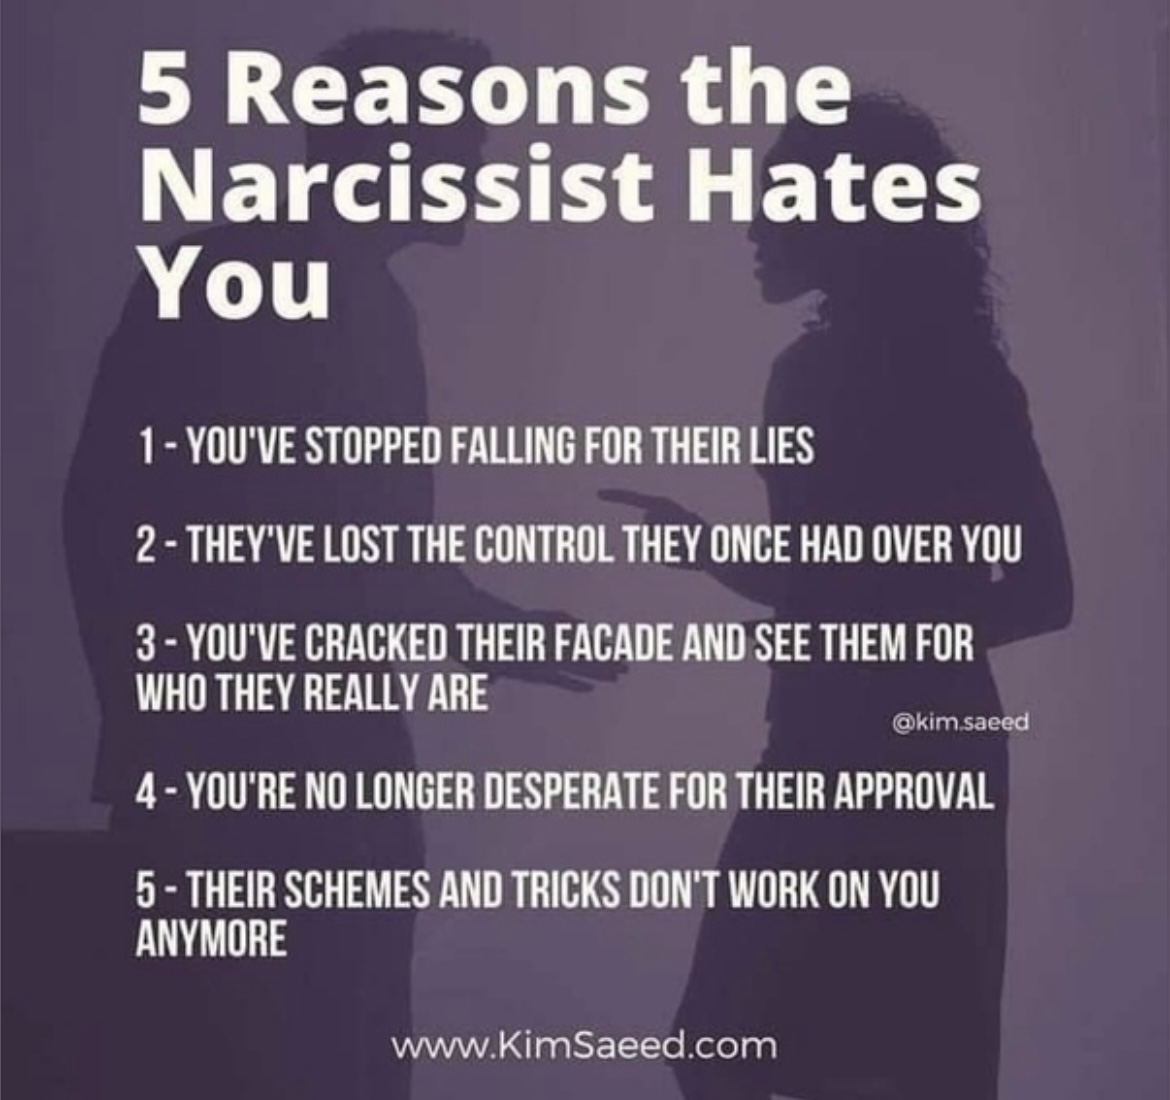 #Narcissist #narcissists #narcissism #narcissistic #narcissisticabuse #abuse #abuseawarenes #abusesurvivor #narcissisticex #Loveyourself #selflove #selfcare #LiveyourDreams #liveyourlife #beyourself #independent #independence #independentwoman #WomensRights